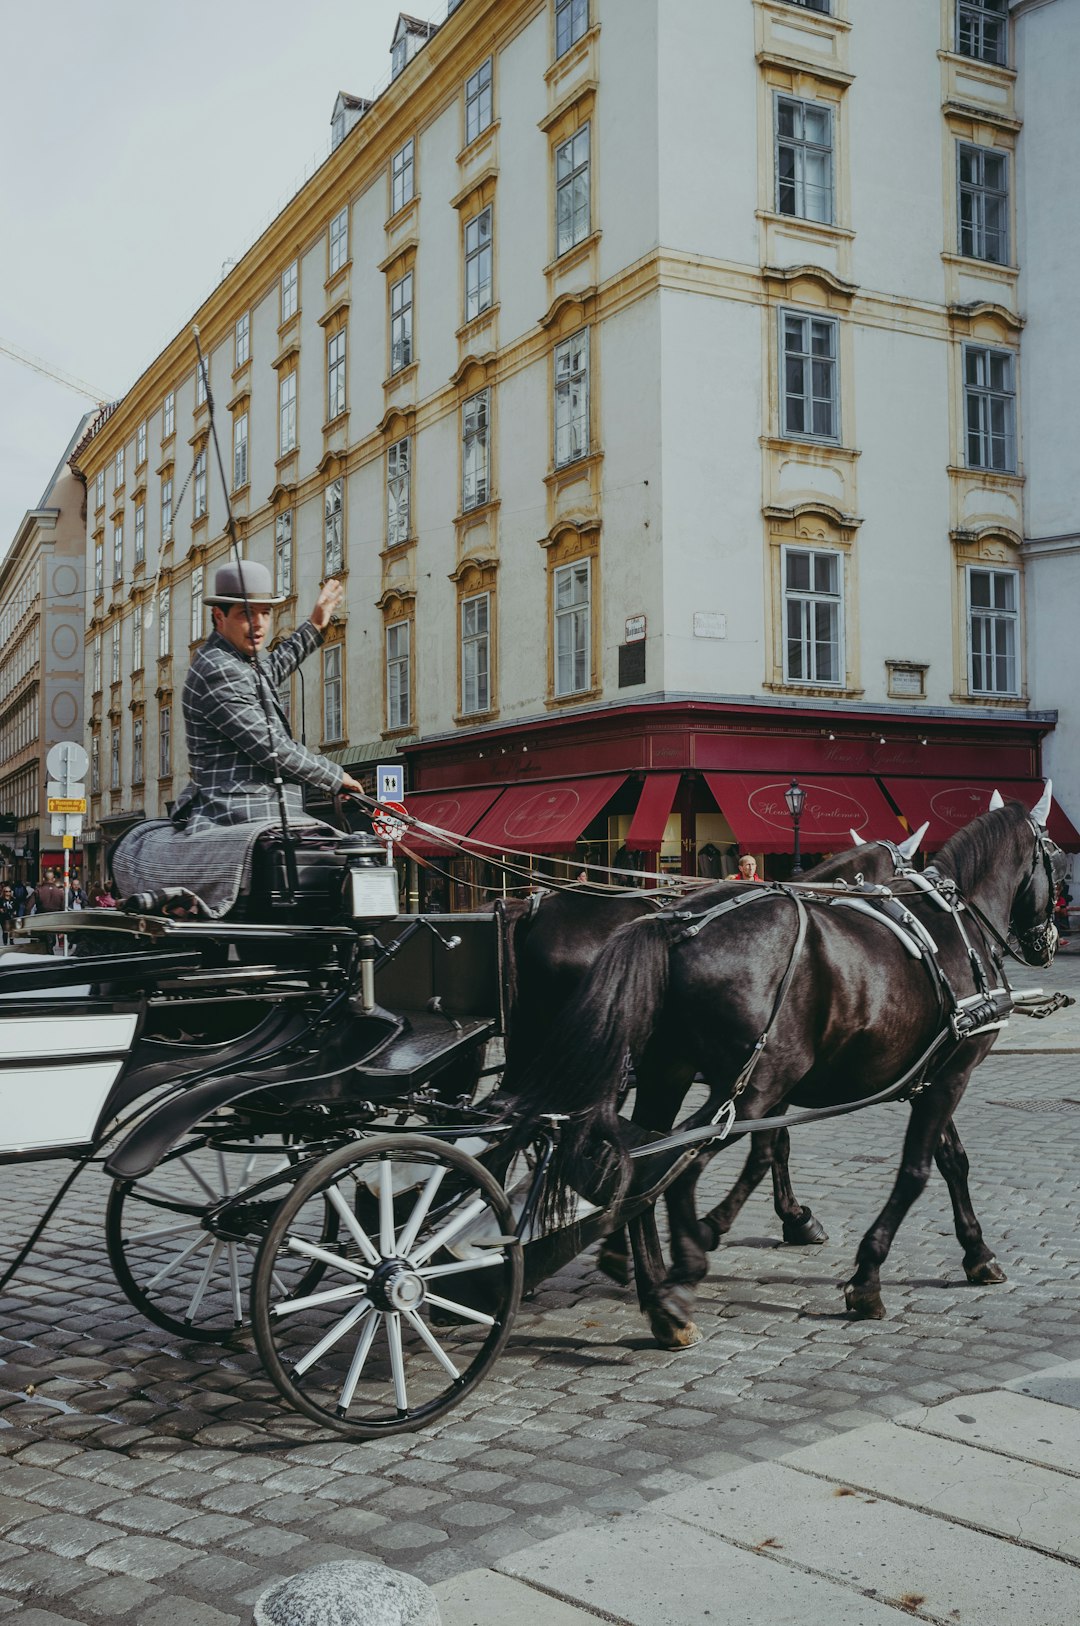 man riding on black horse carriage near beige concrete building during daytime